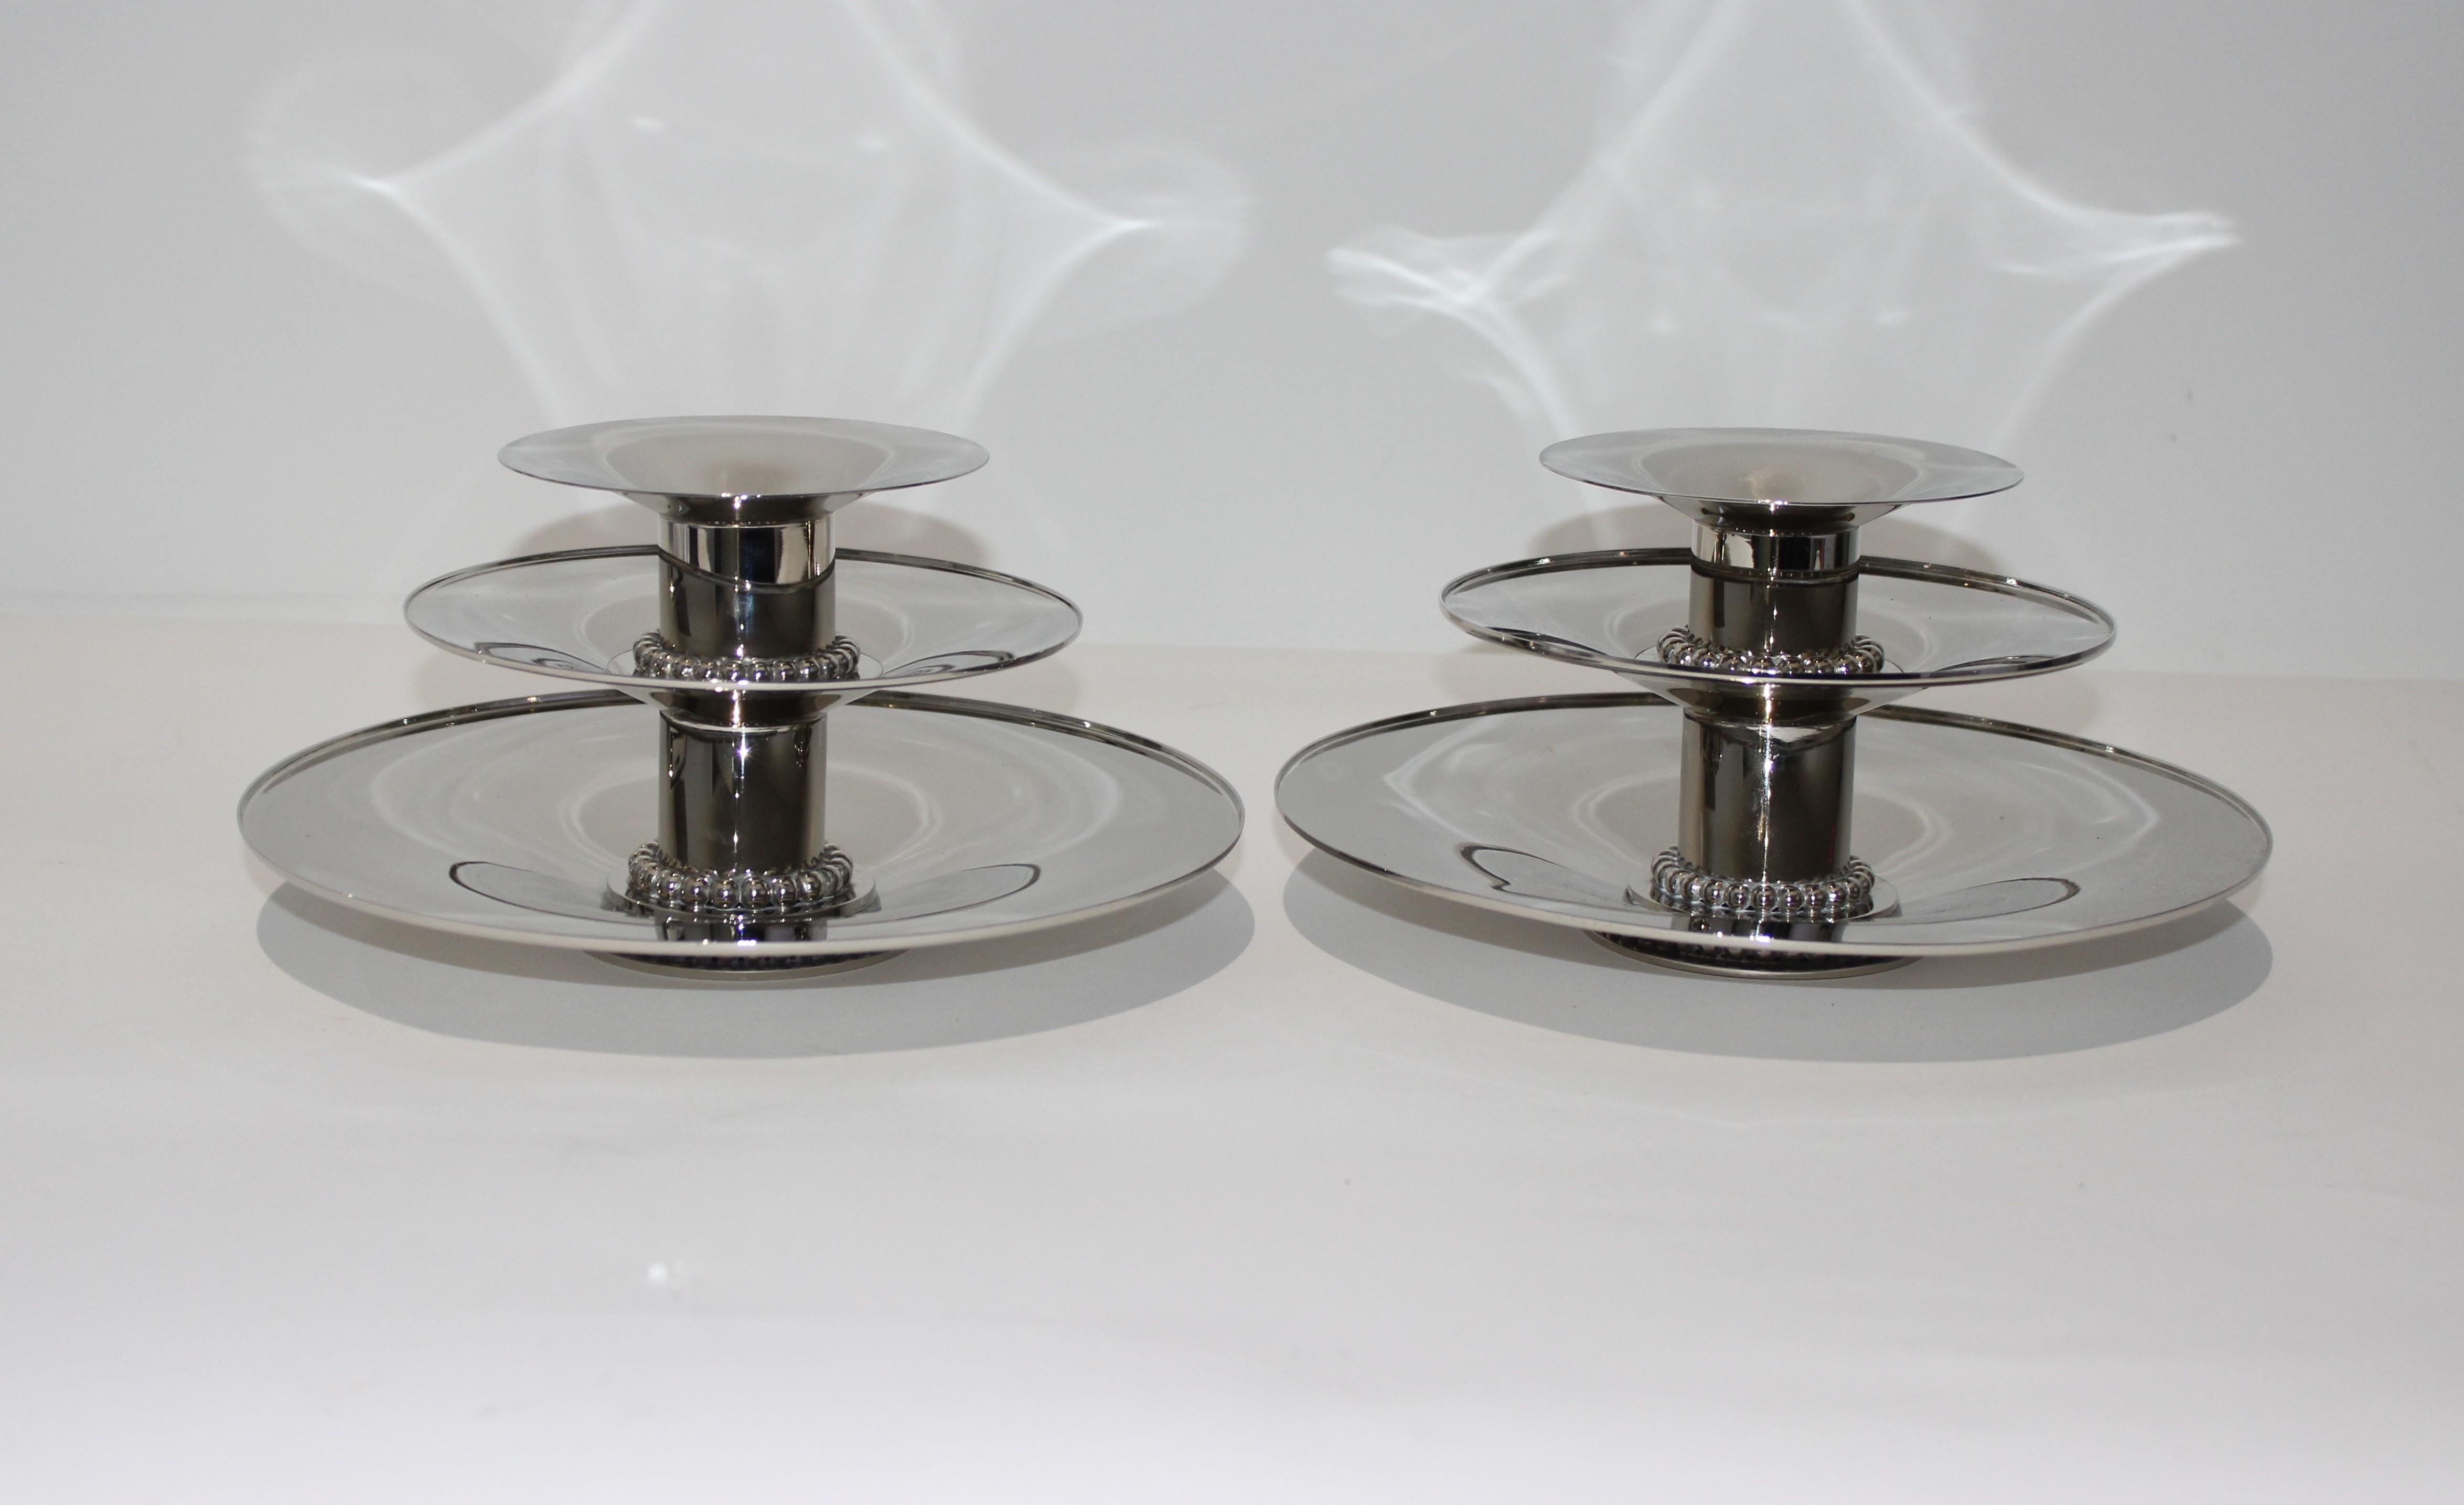 Plated Pair of Carole Stuppell Art Deco Candleholders